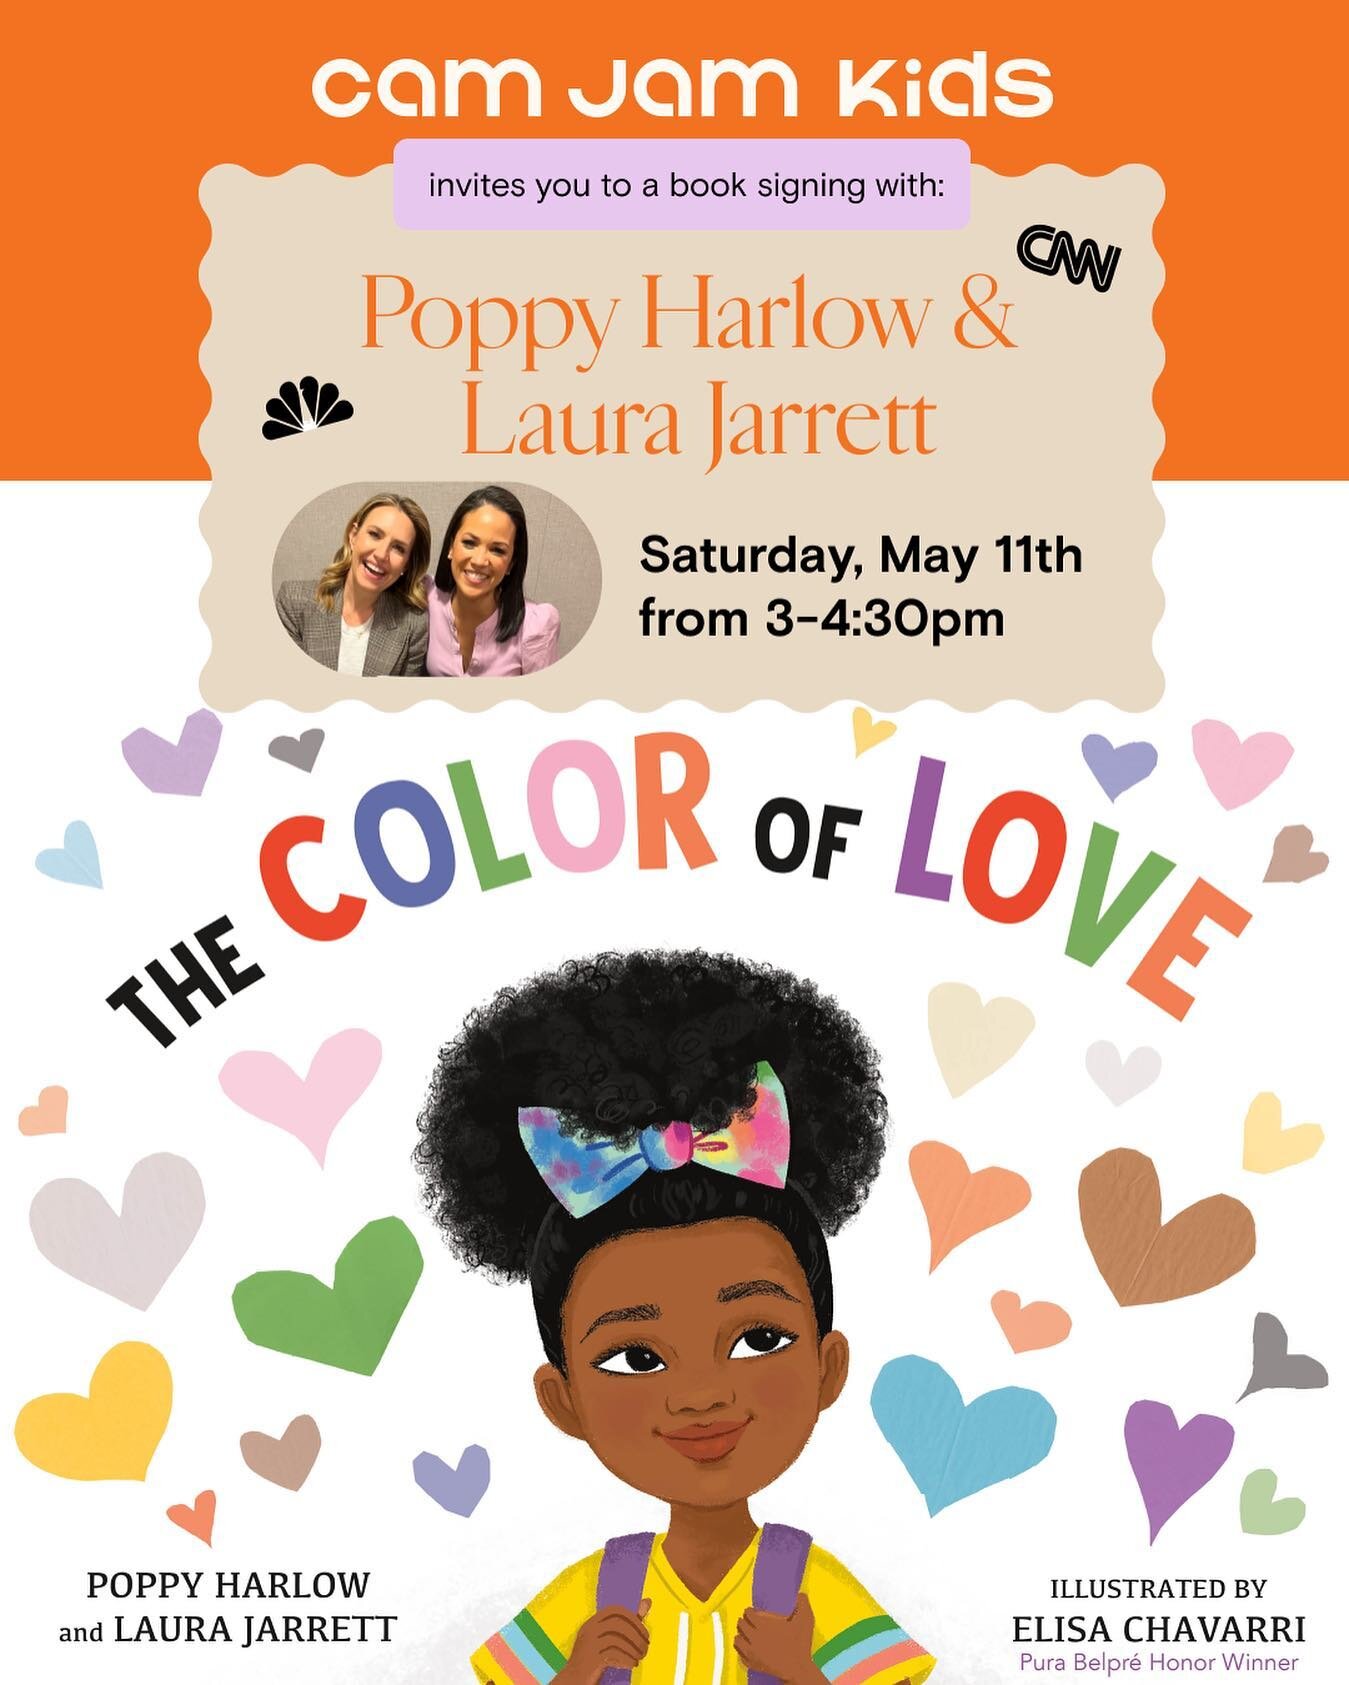 GIDDY to announce Cam Jam Kids&rsquo; first book signing! CJK is beyond excited to host @poppyharlowcnn and @laurajarrett to celebrate their new children&rsquo;s book, The Color of Love, on Saturday, May 11th from 3-4:30pm. 📚 

Mark your calendars a